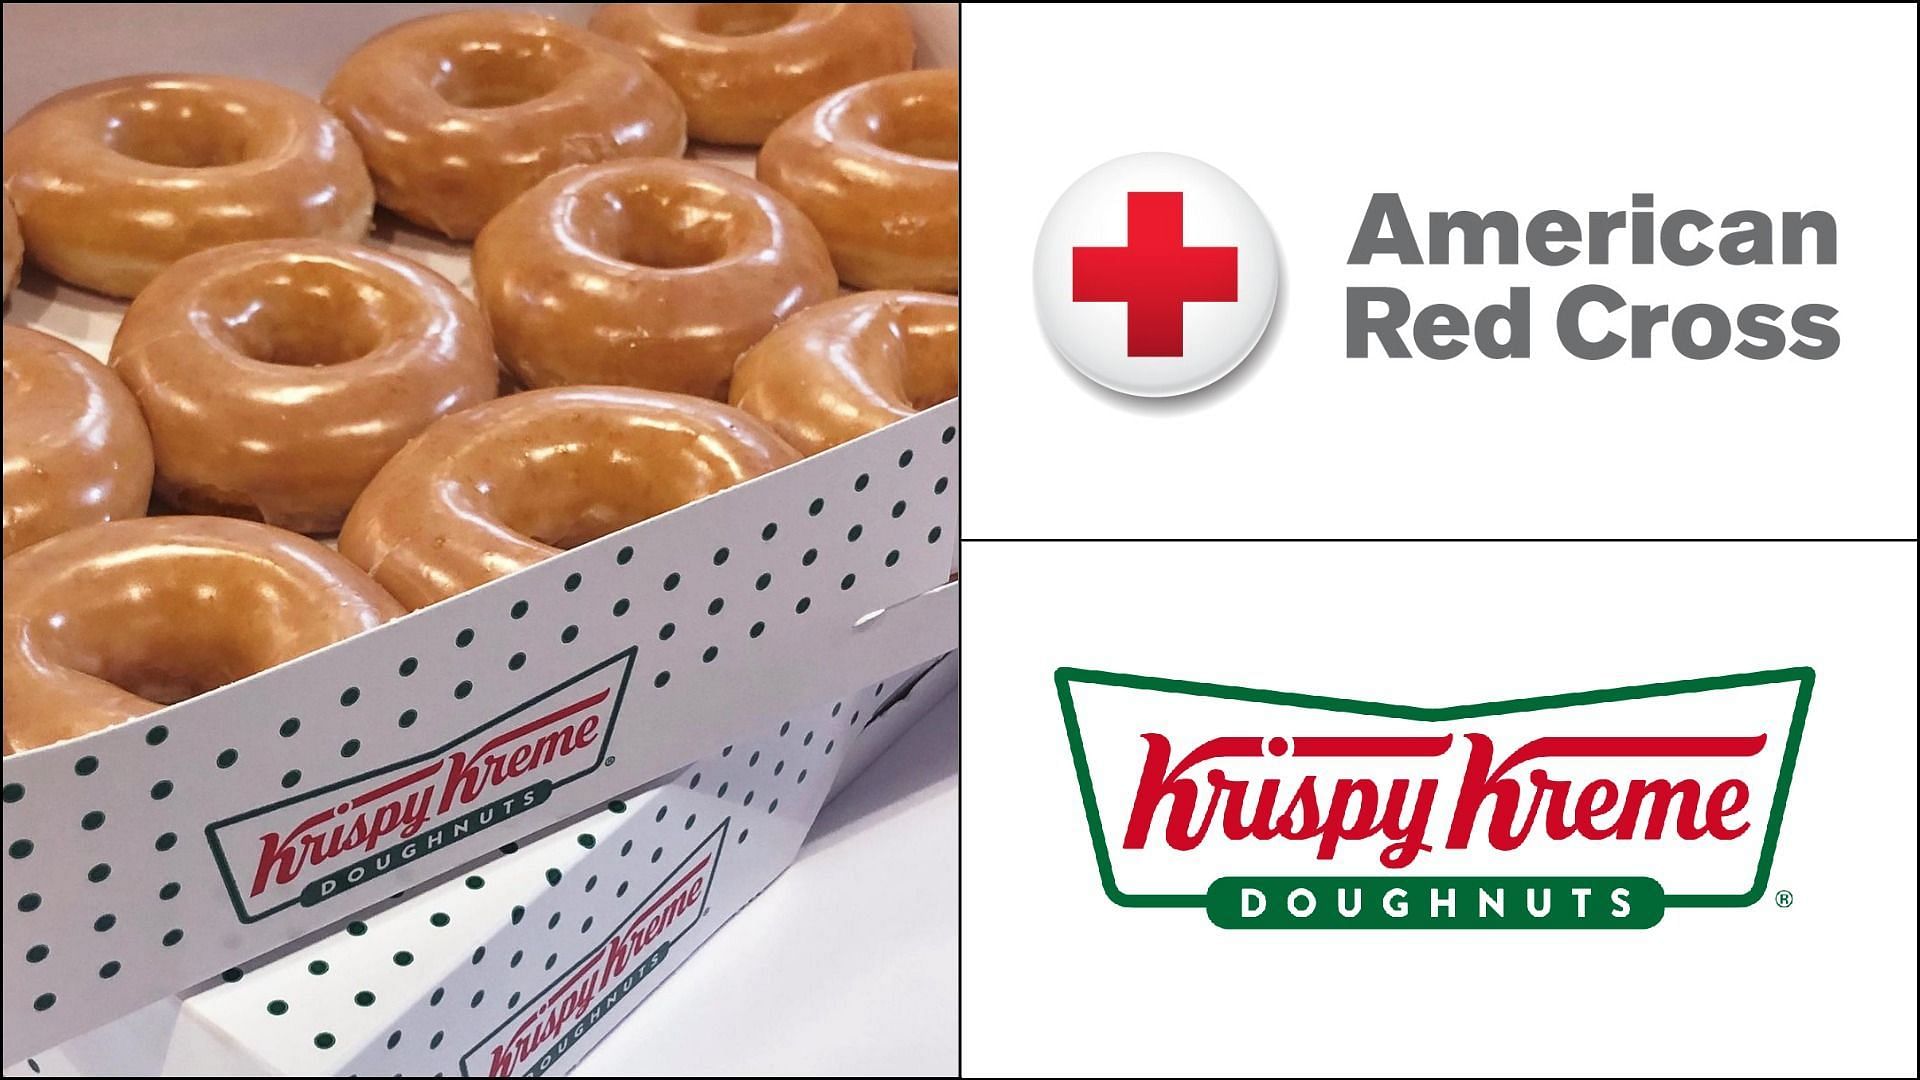 Krispy Kreme has partnered with American Red Cross for a giveaway (Images via Krispy Kreme and Red Cross)